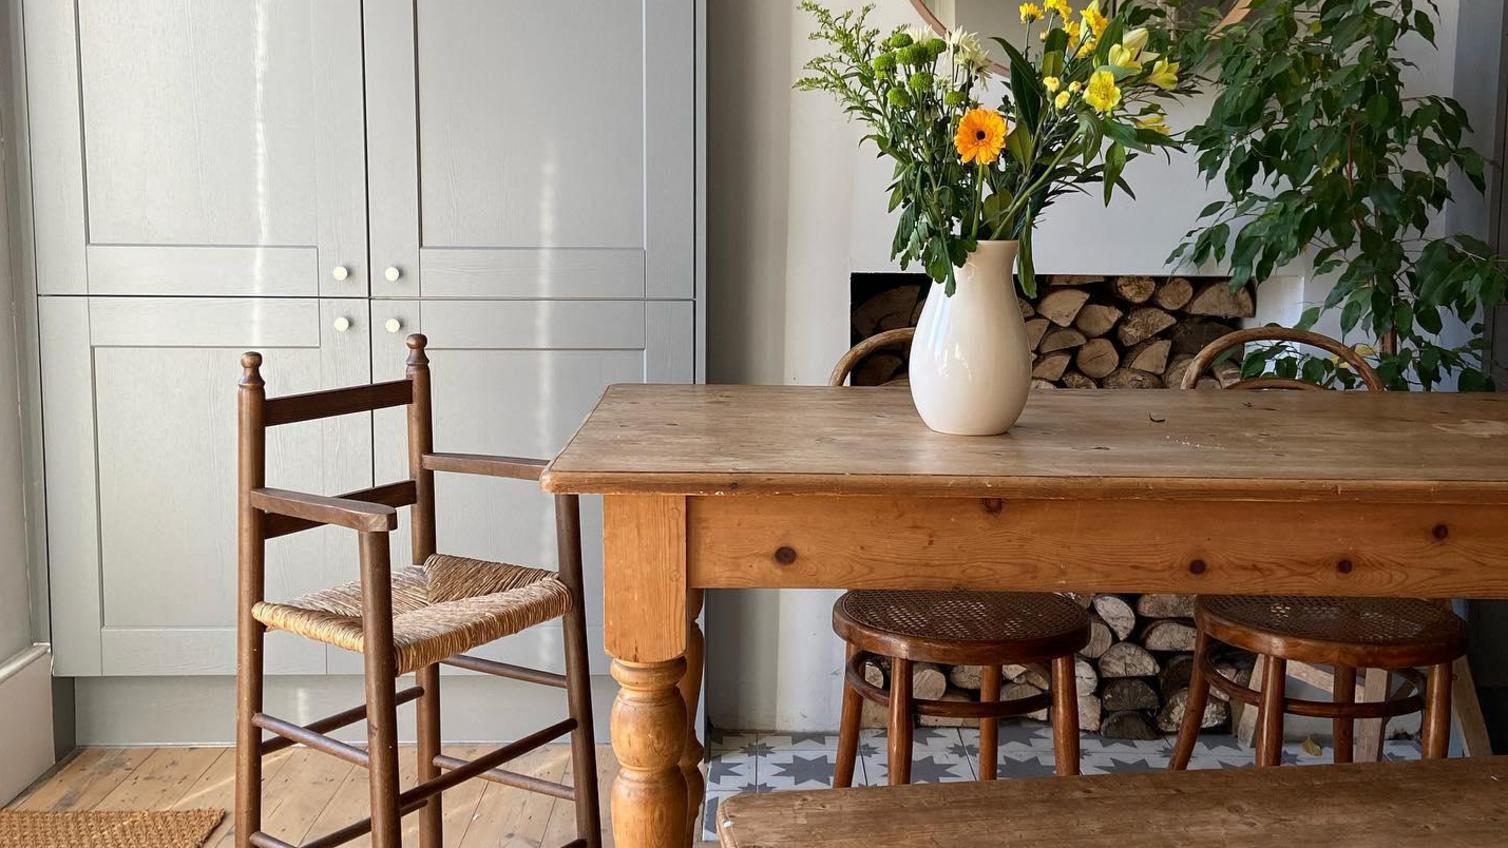 Farmhouse dining room idea with a light grey tower cupboard, a dark solid wood dining table, bench and stool chair.